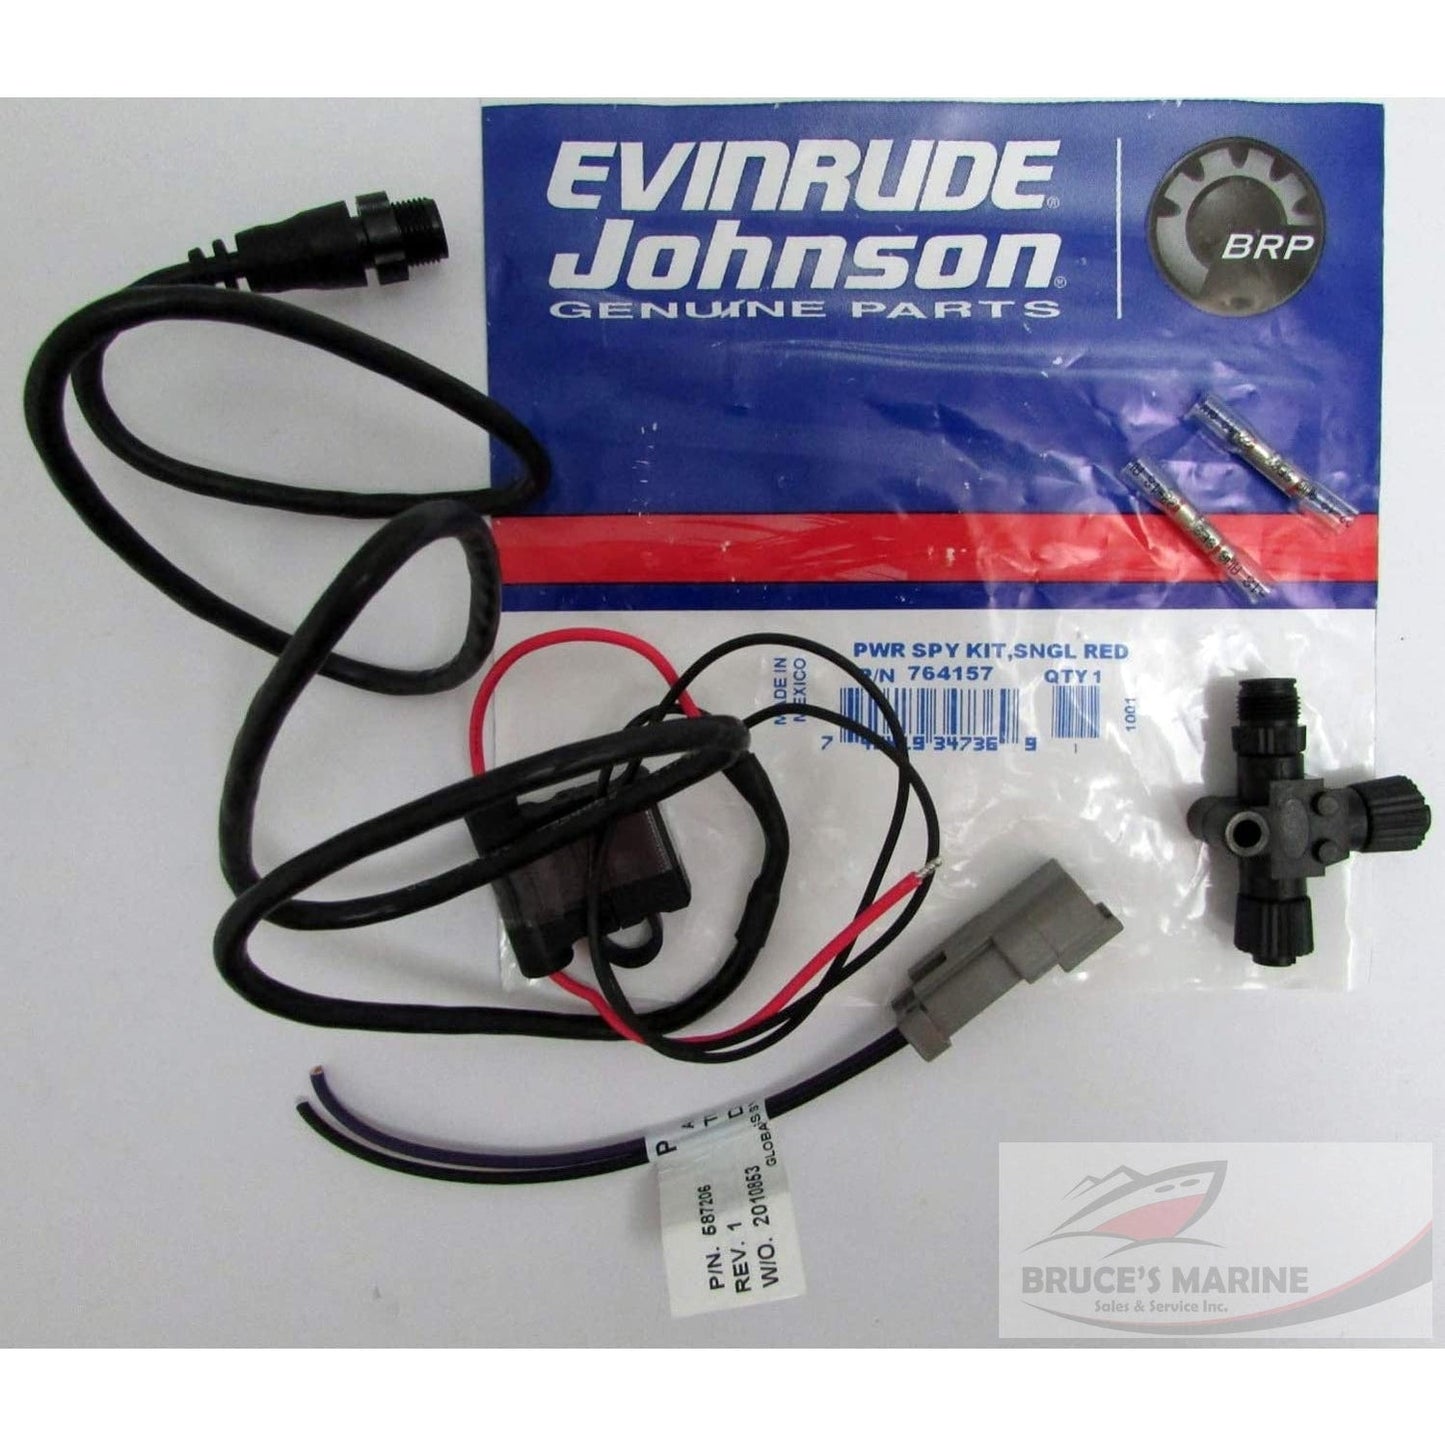 Evinrude/Johnson/OMC/BRP New OEM I-Command Power Supply Cable Kit #764157